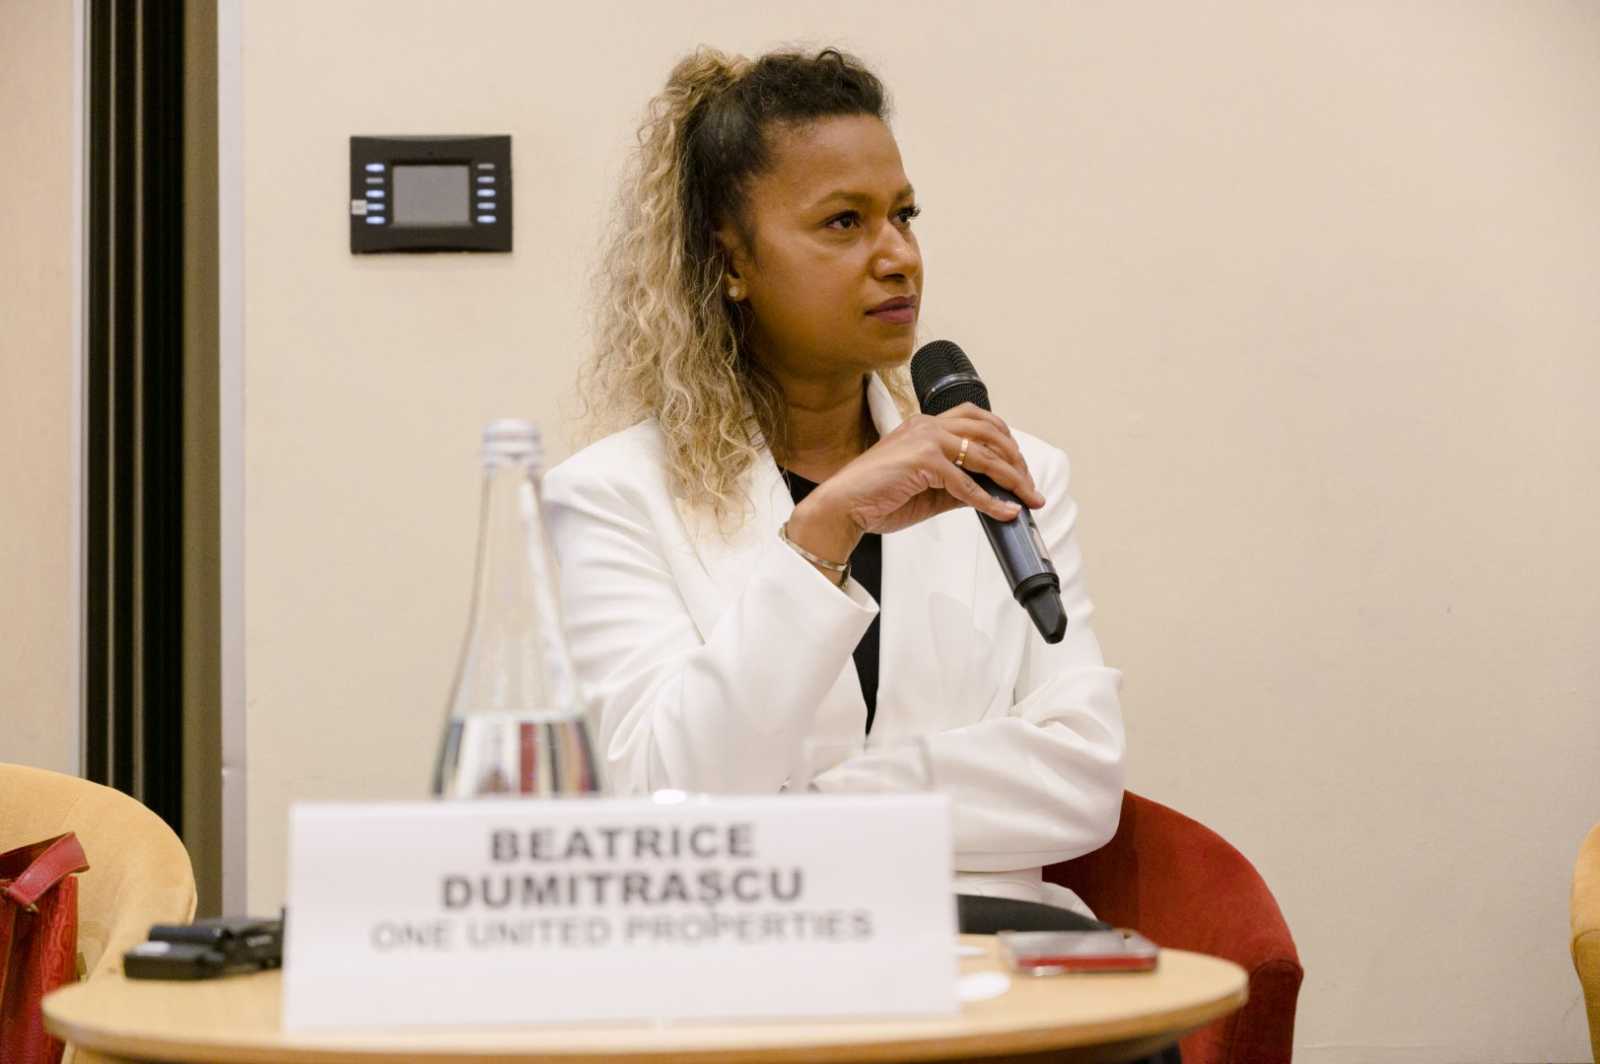 Beatrice Dumitrașcu at BREC Residential Conference 2